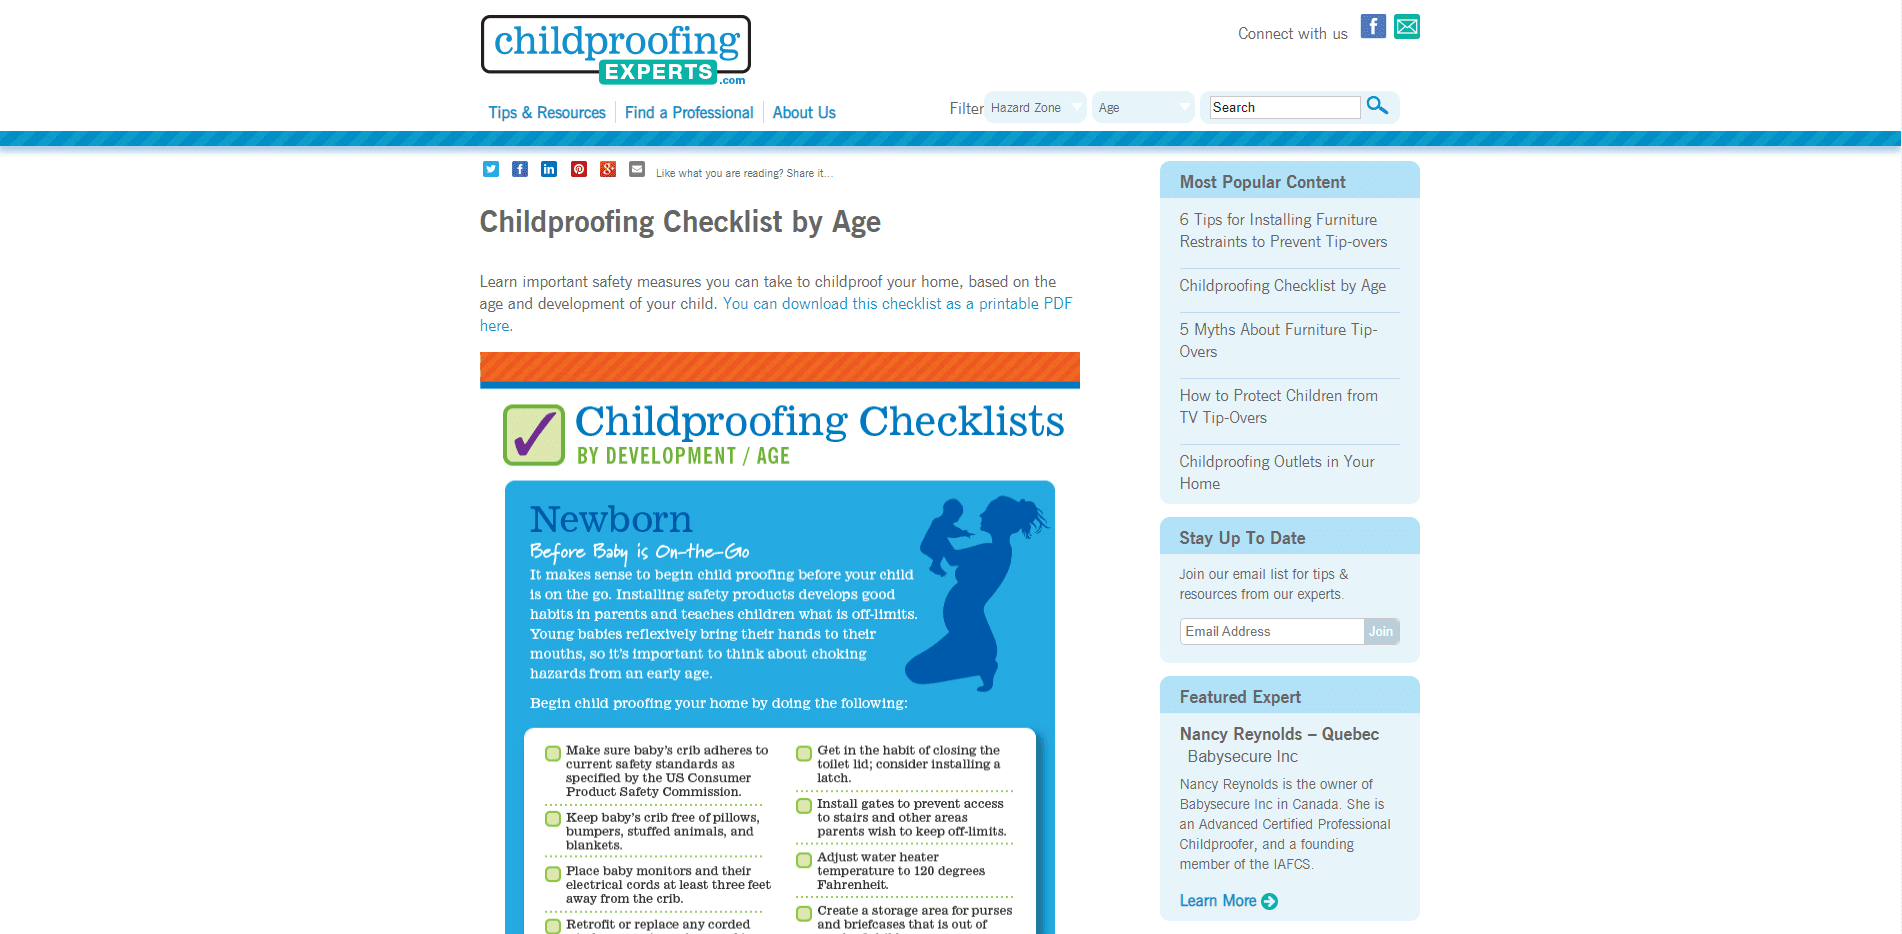 Childproofing Checklist by Age